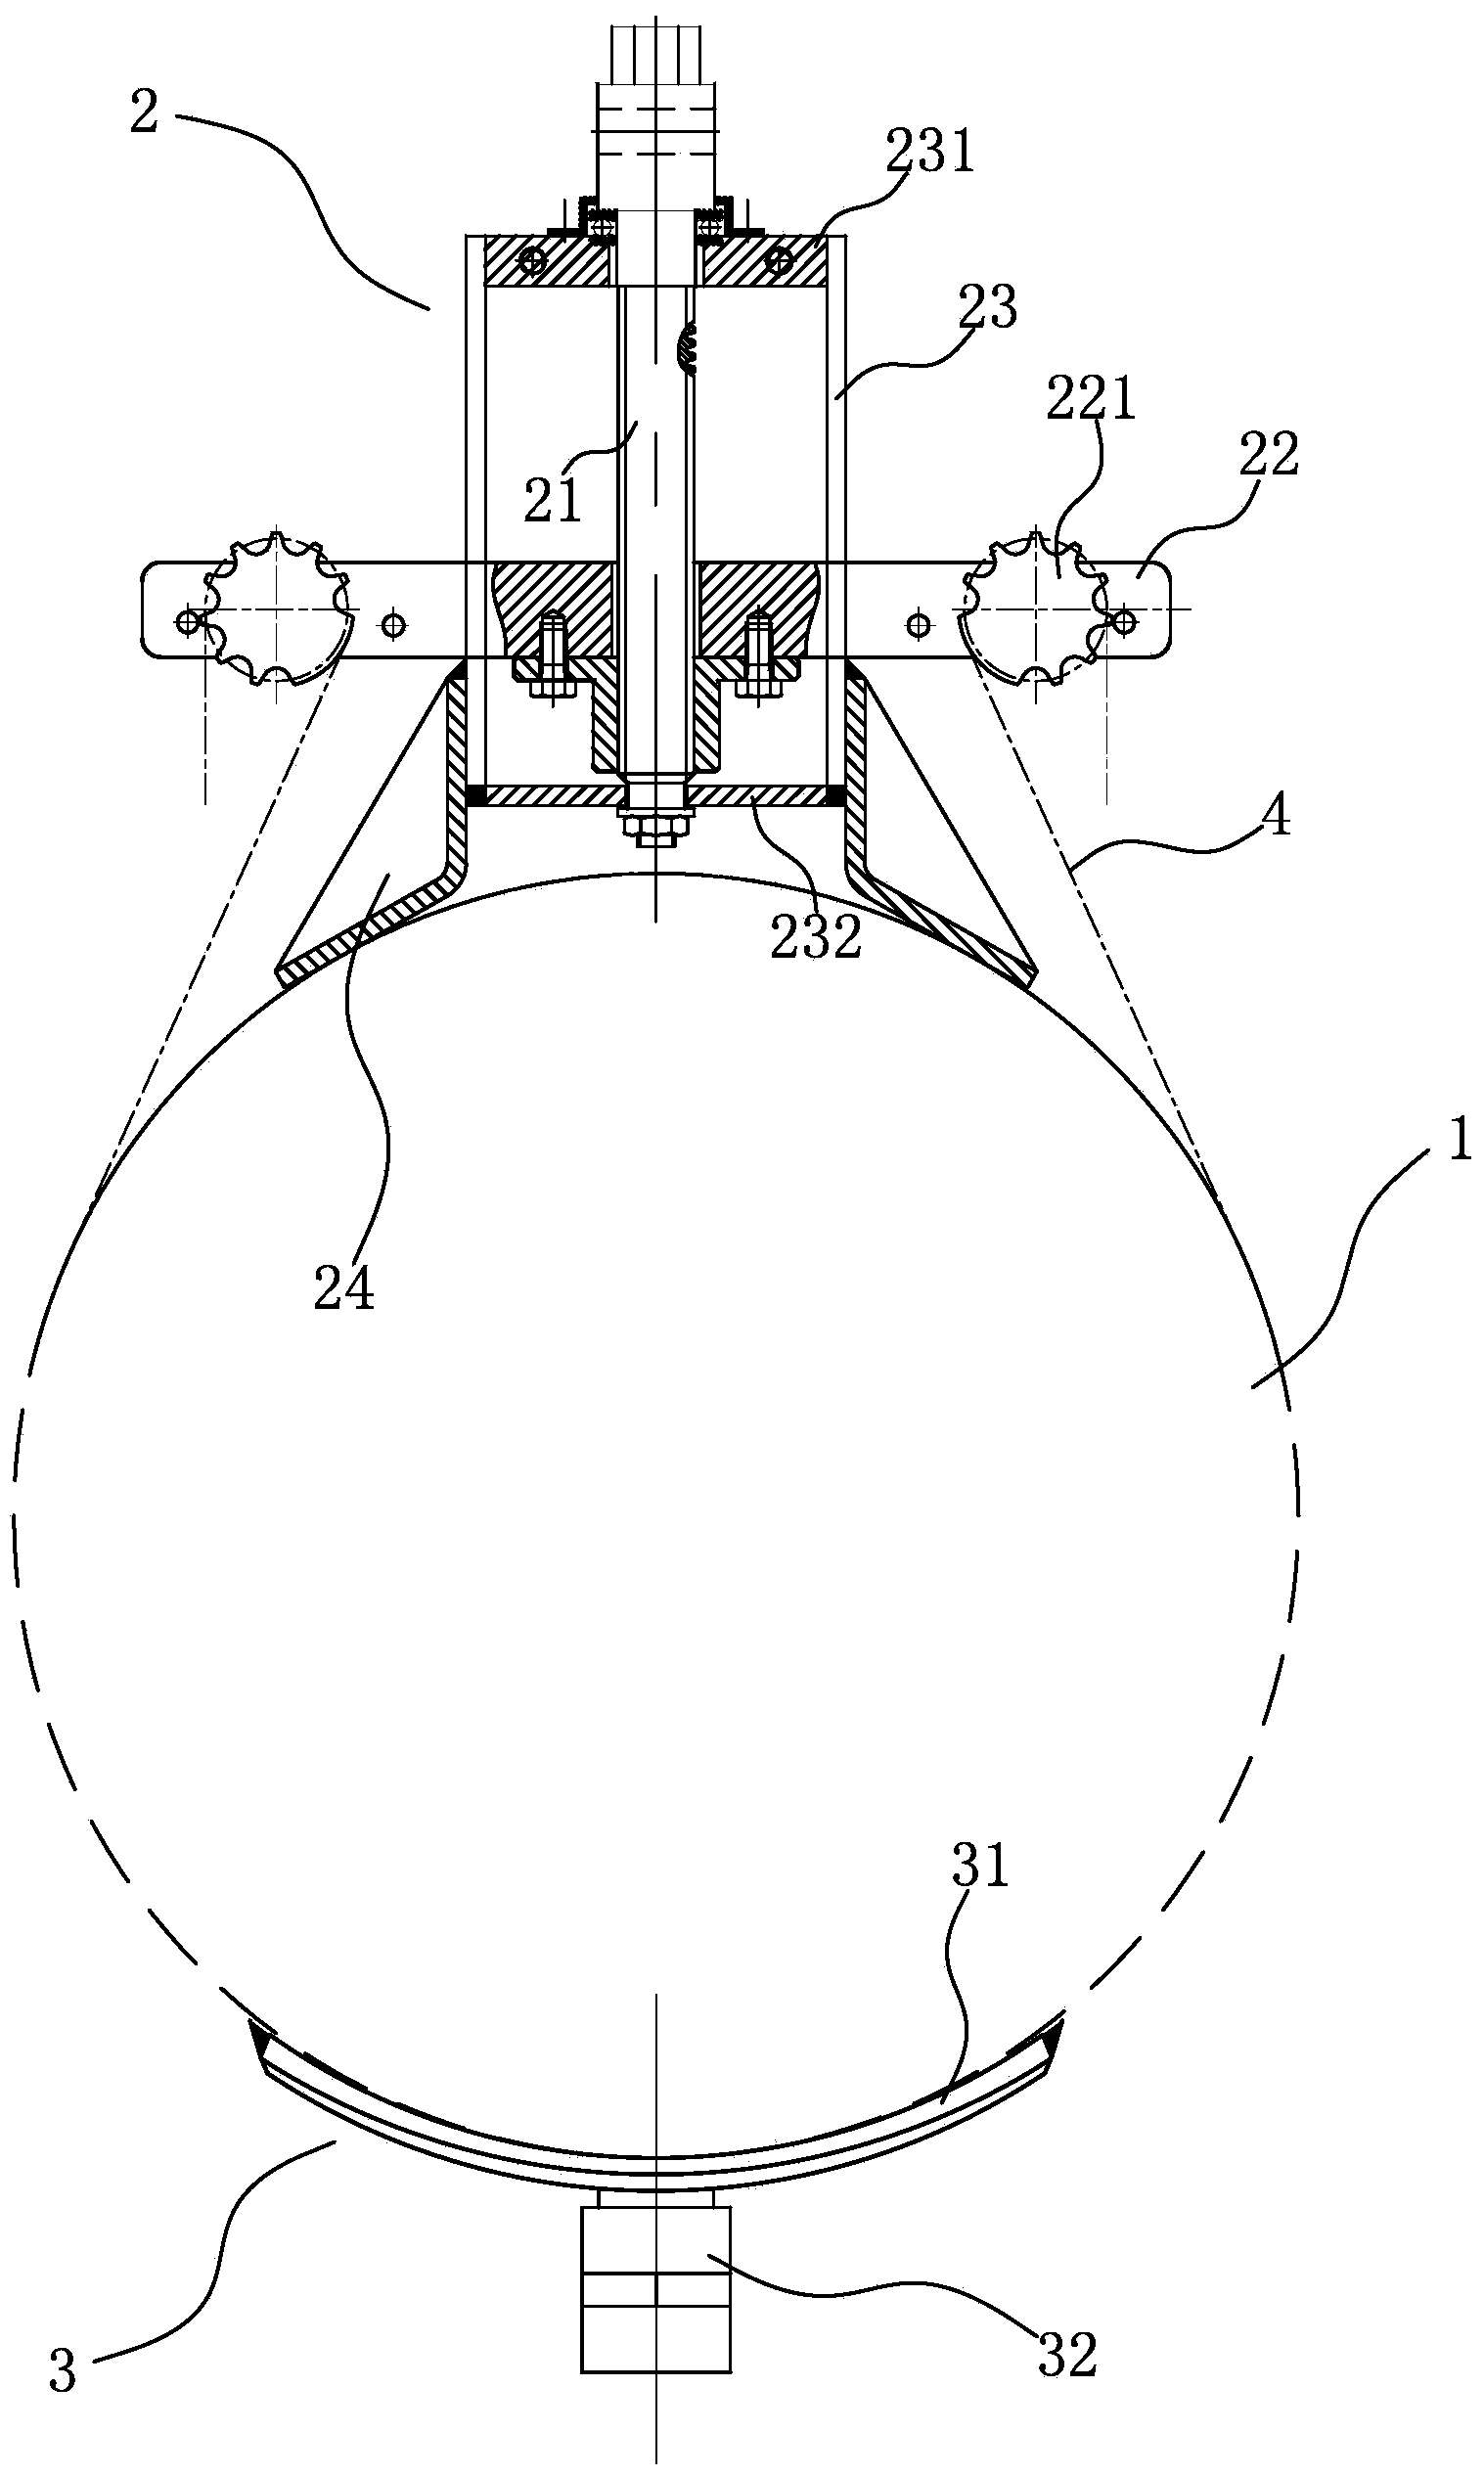 Self-protected under-pressure leakage plugging device and method for rushing to repair pipeline by using self-protected under-pressure leakage plugging device